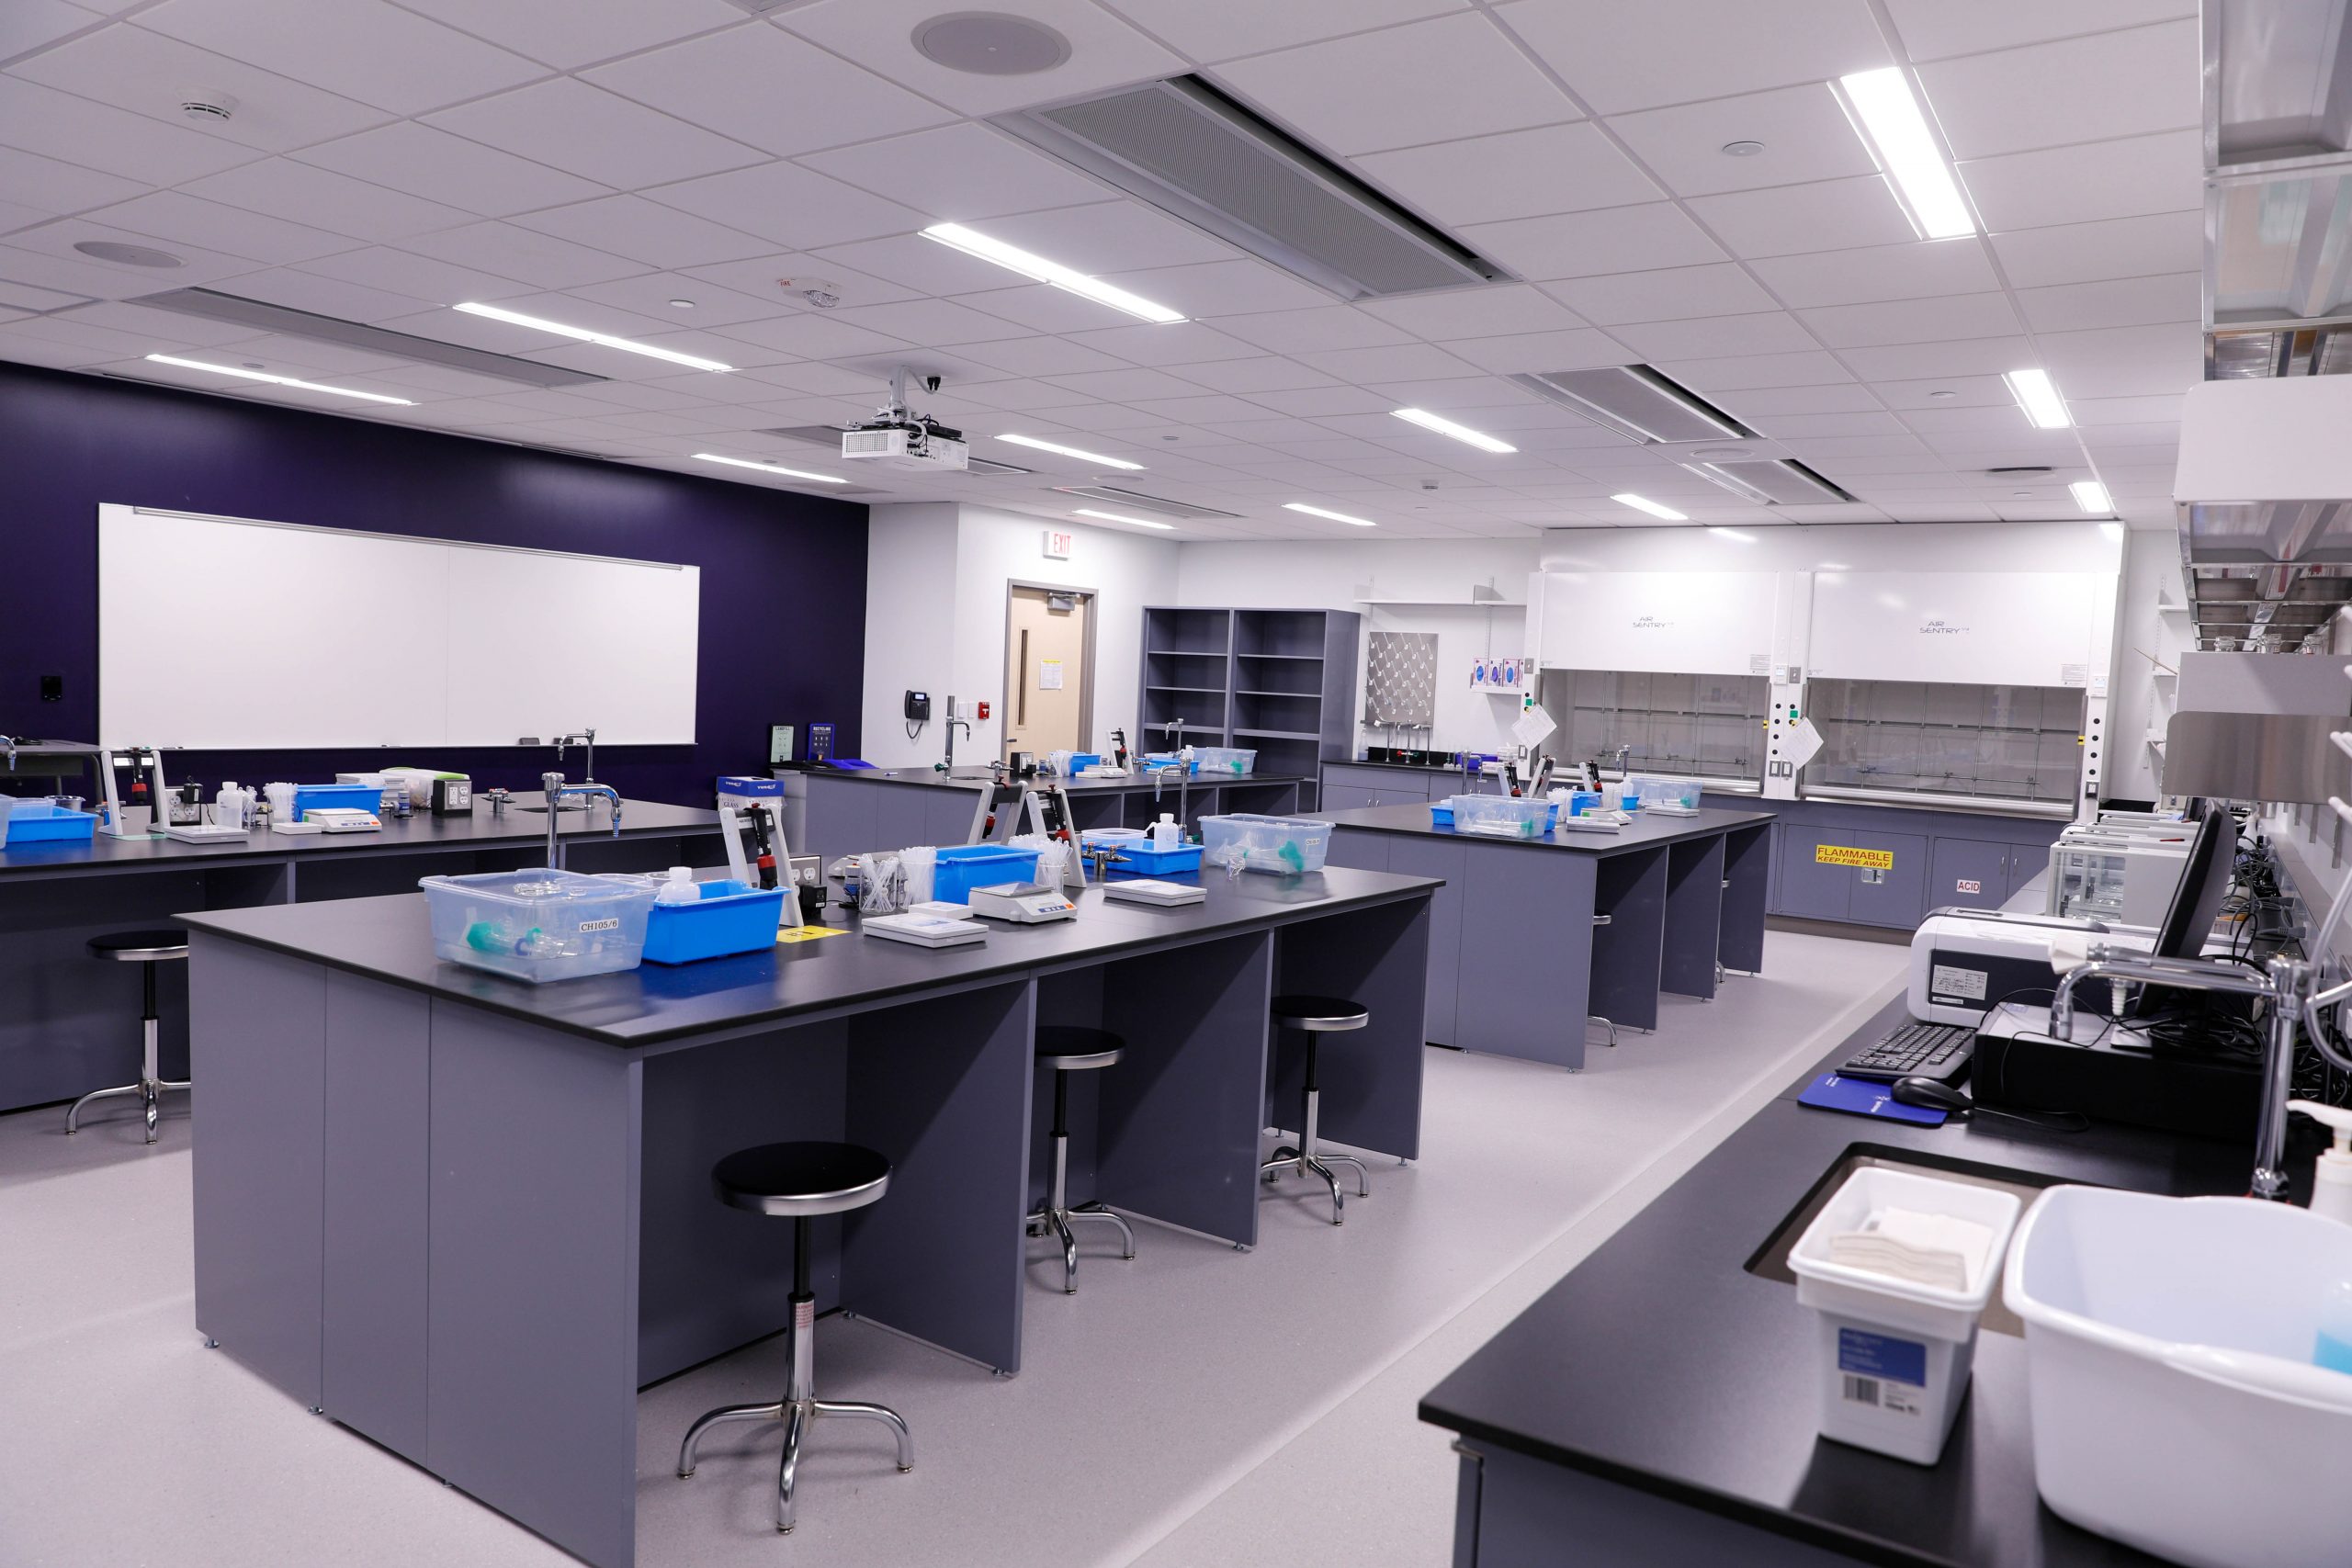 A laboratory in the new Sciences Complex, with collaborative work stations and state-of-the-art equipment